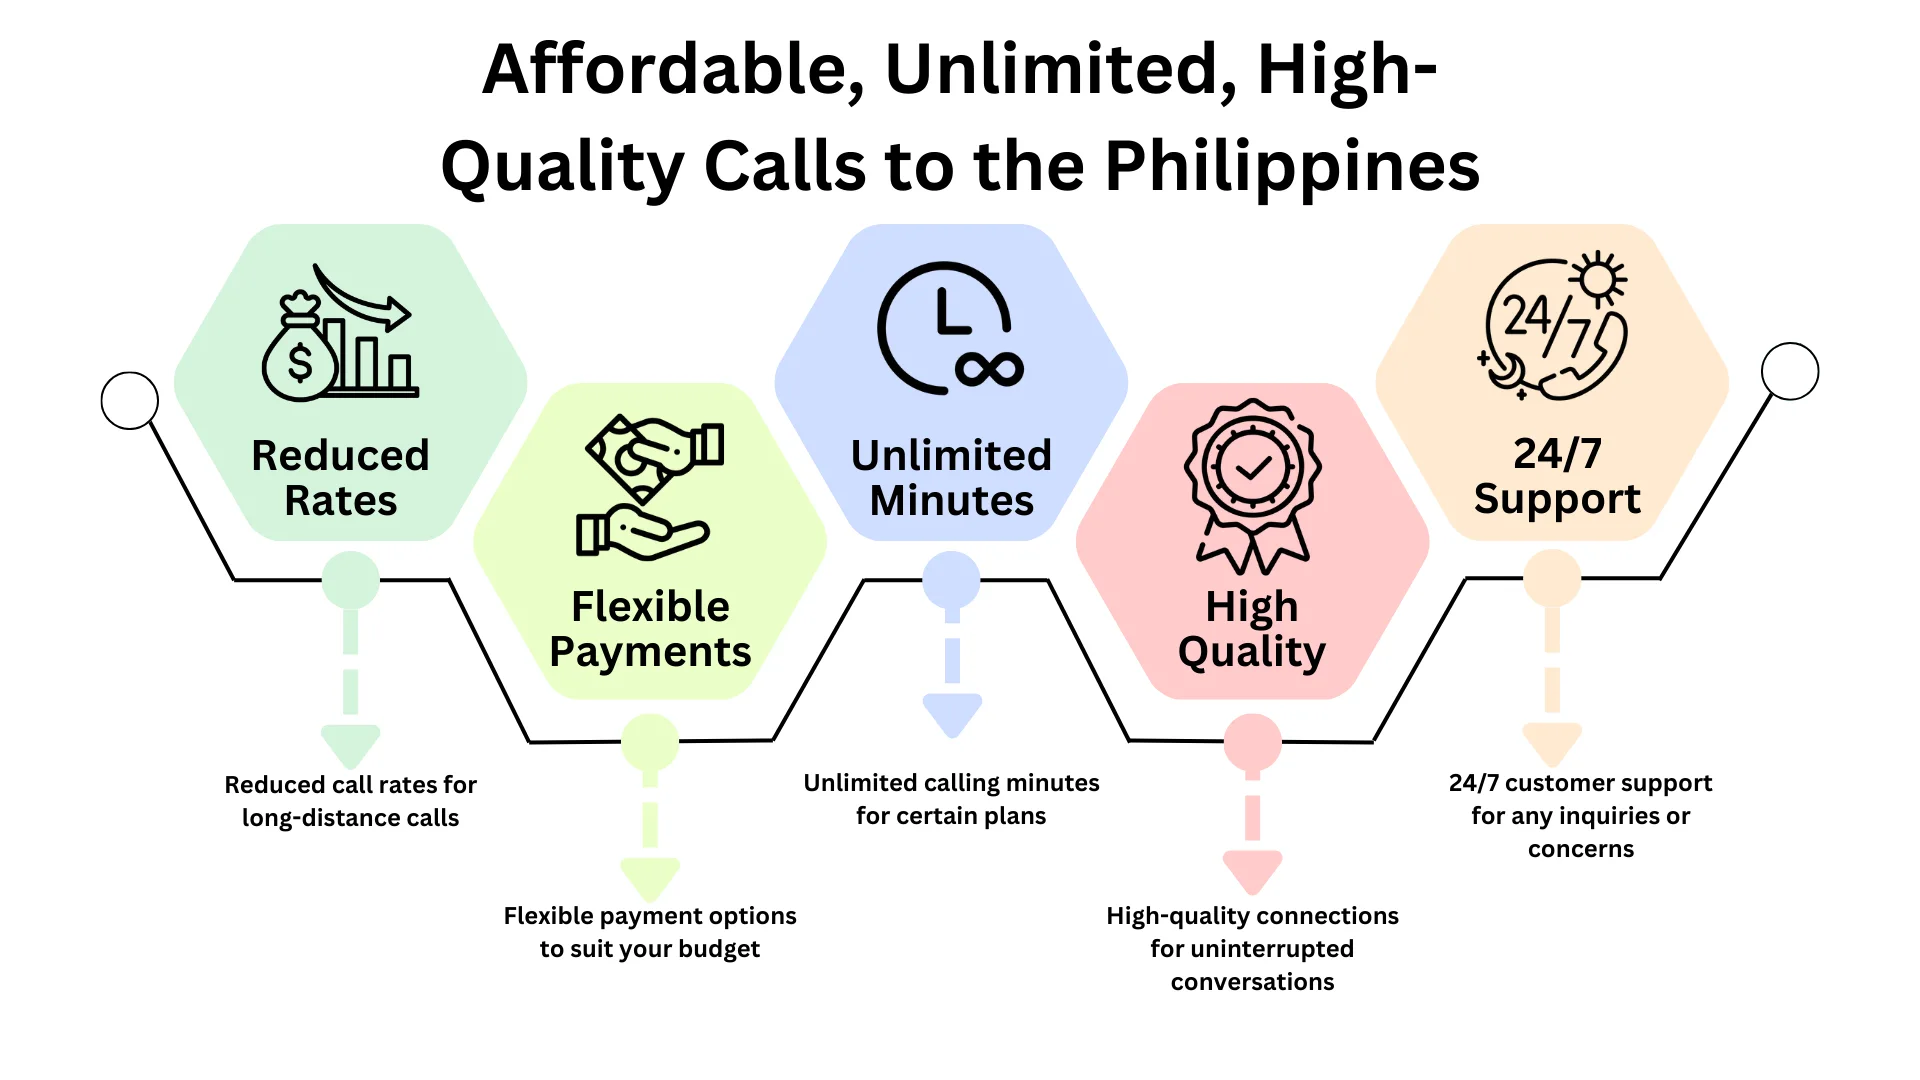 International Calling Plans for the Philippines